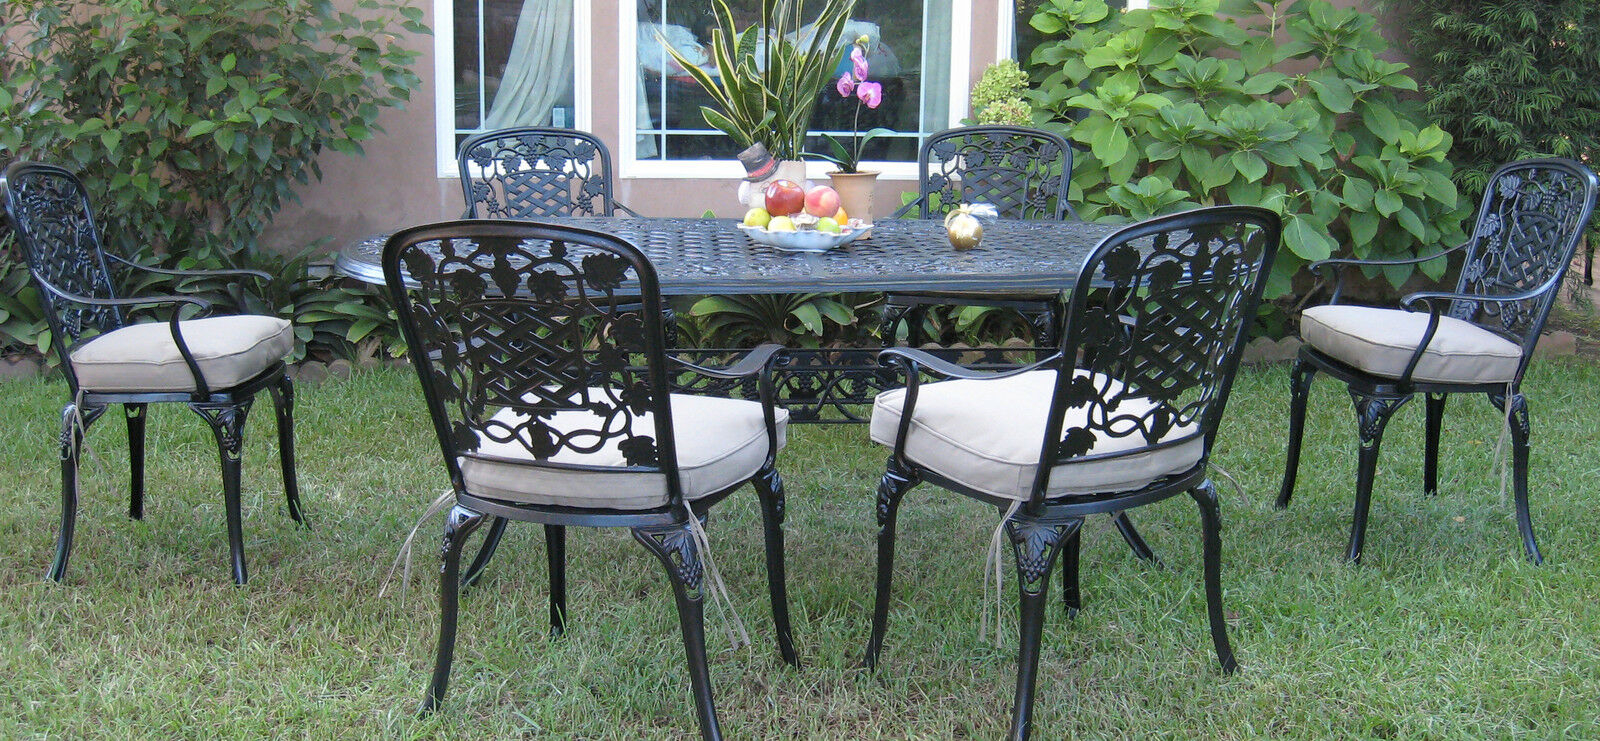 New Cast Aluminum Outdoor Patio 7 Piece Dining Set F With 6 Arm Chairs Cbmpatio in dimensions 1600 X 741